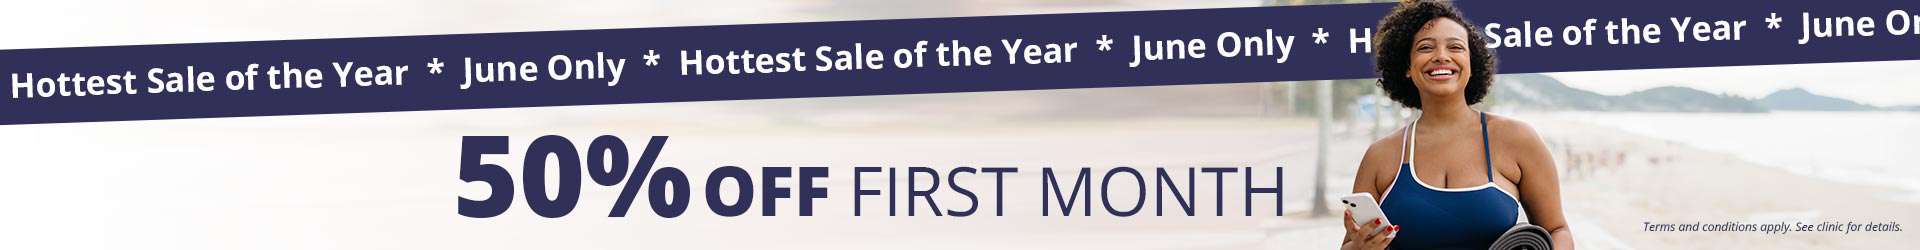 50% off First Month | June Only